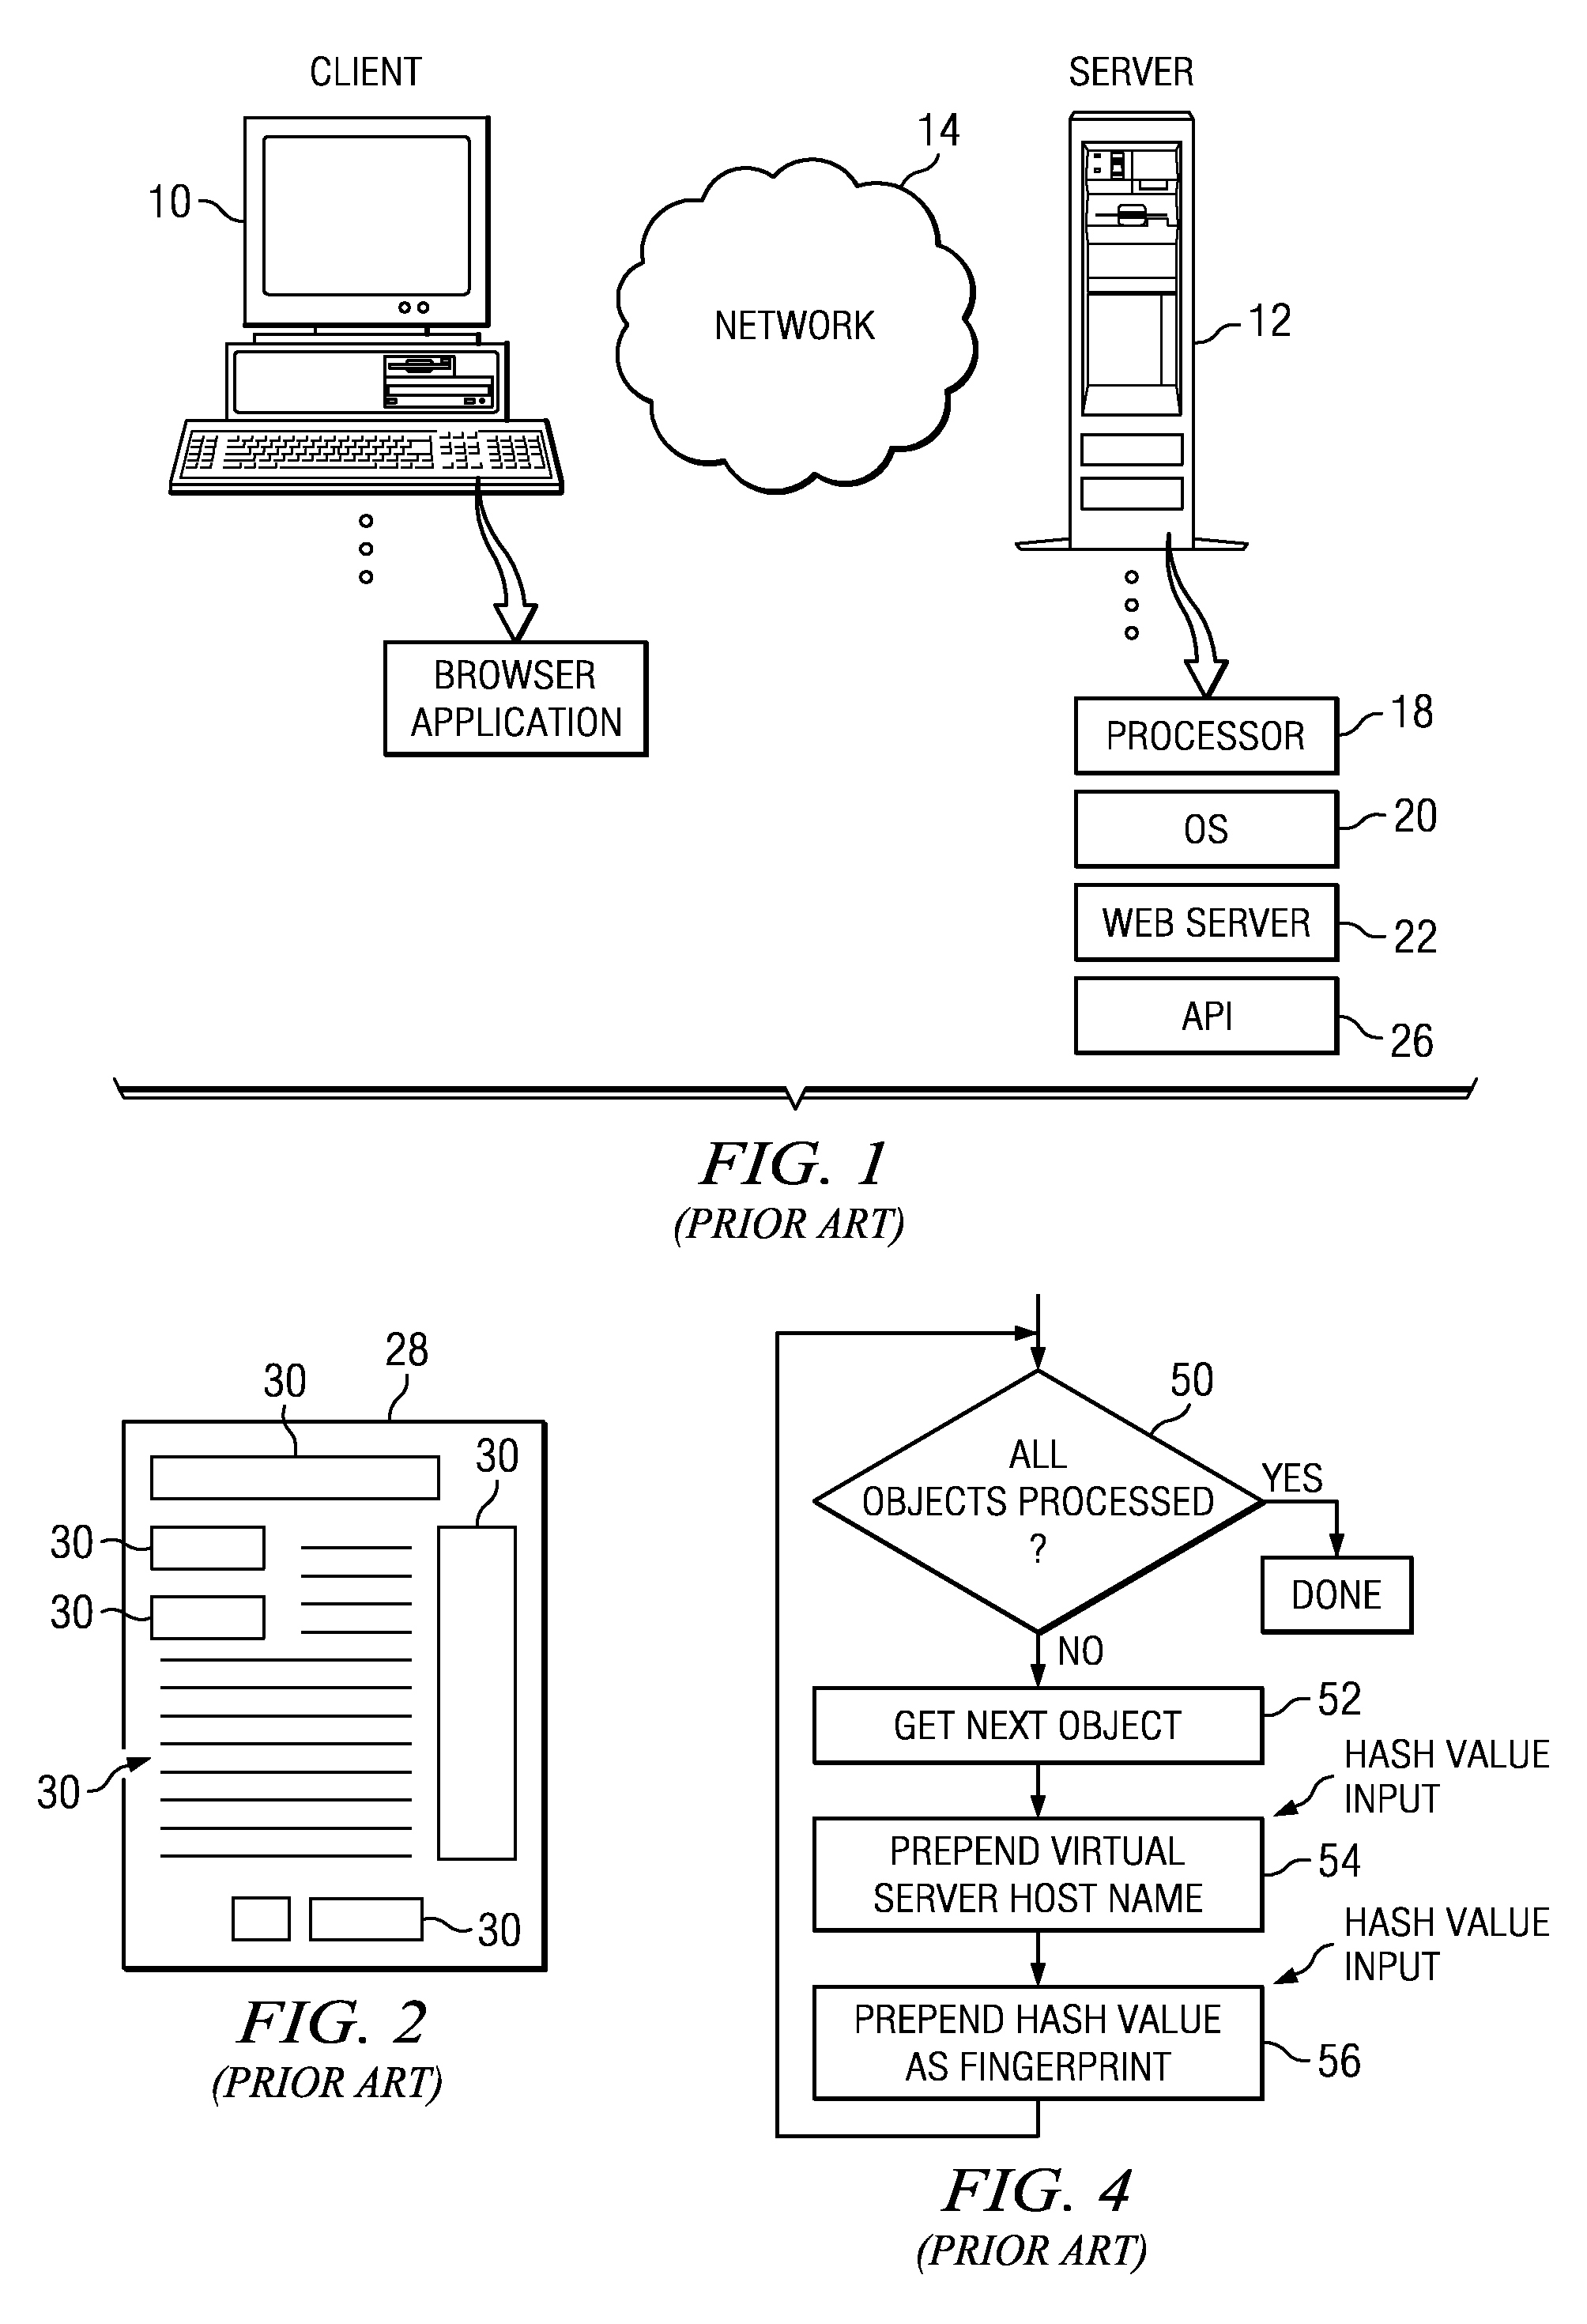 Network performance monitoring in a content delivery service